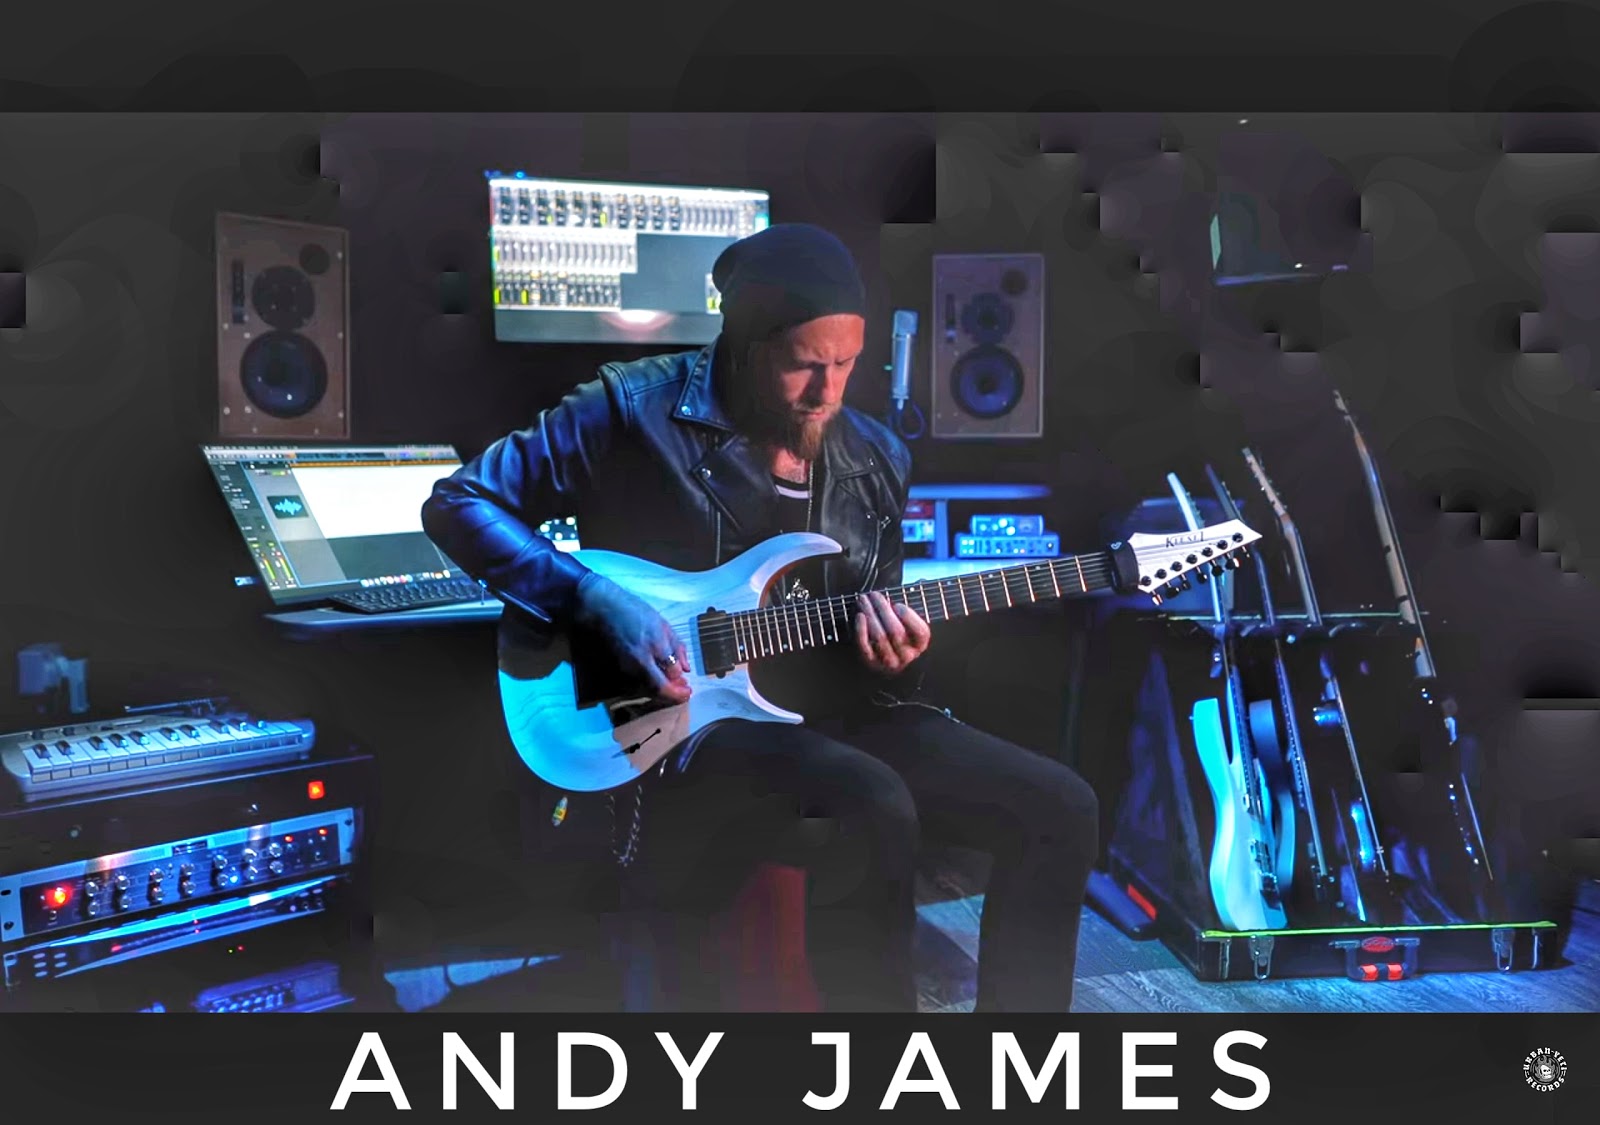 Andy James performing a playthrough of "After Midnight" off his n...